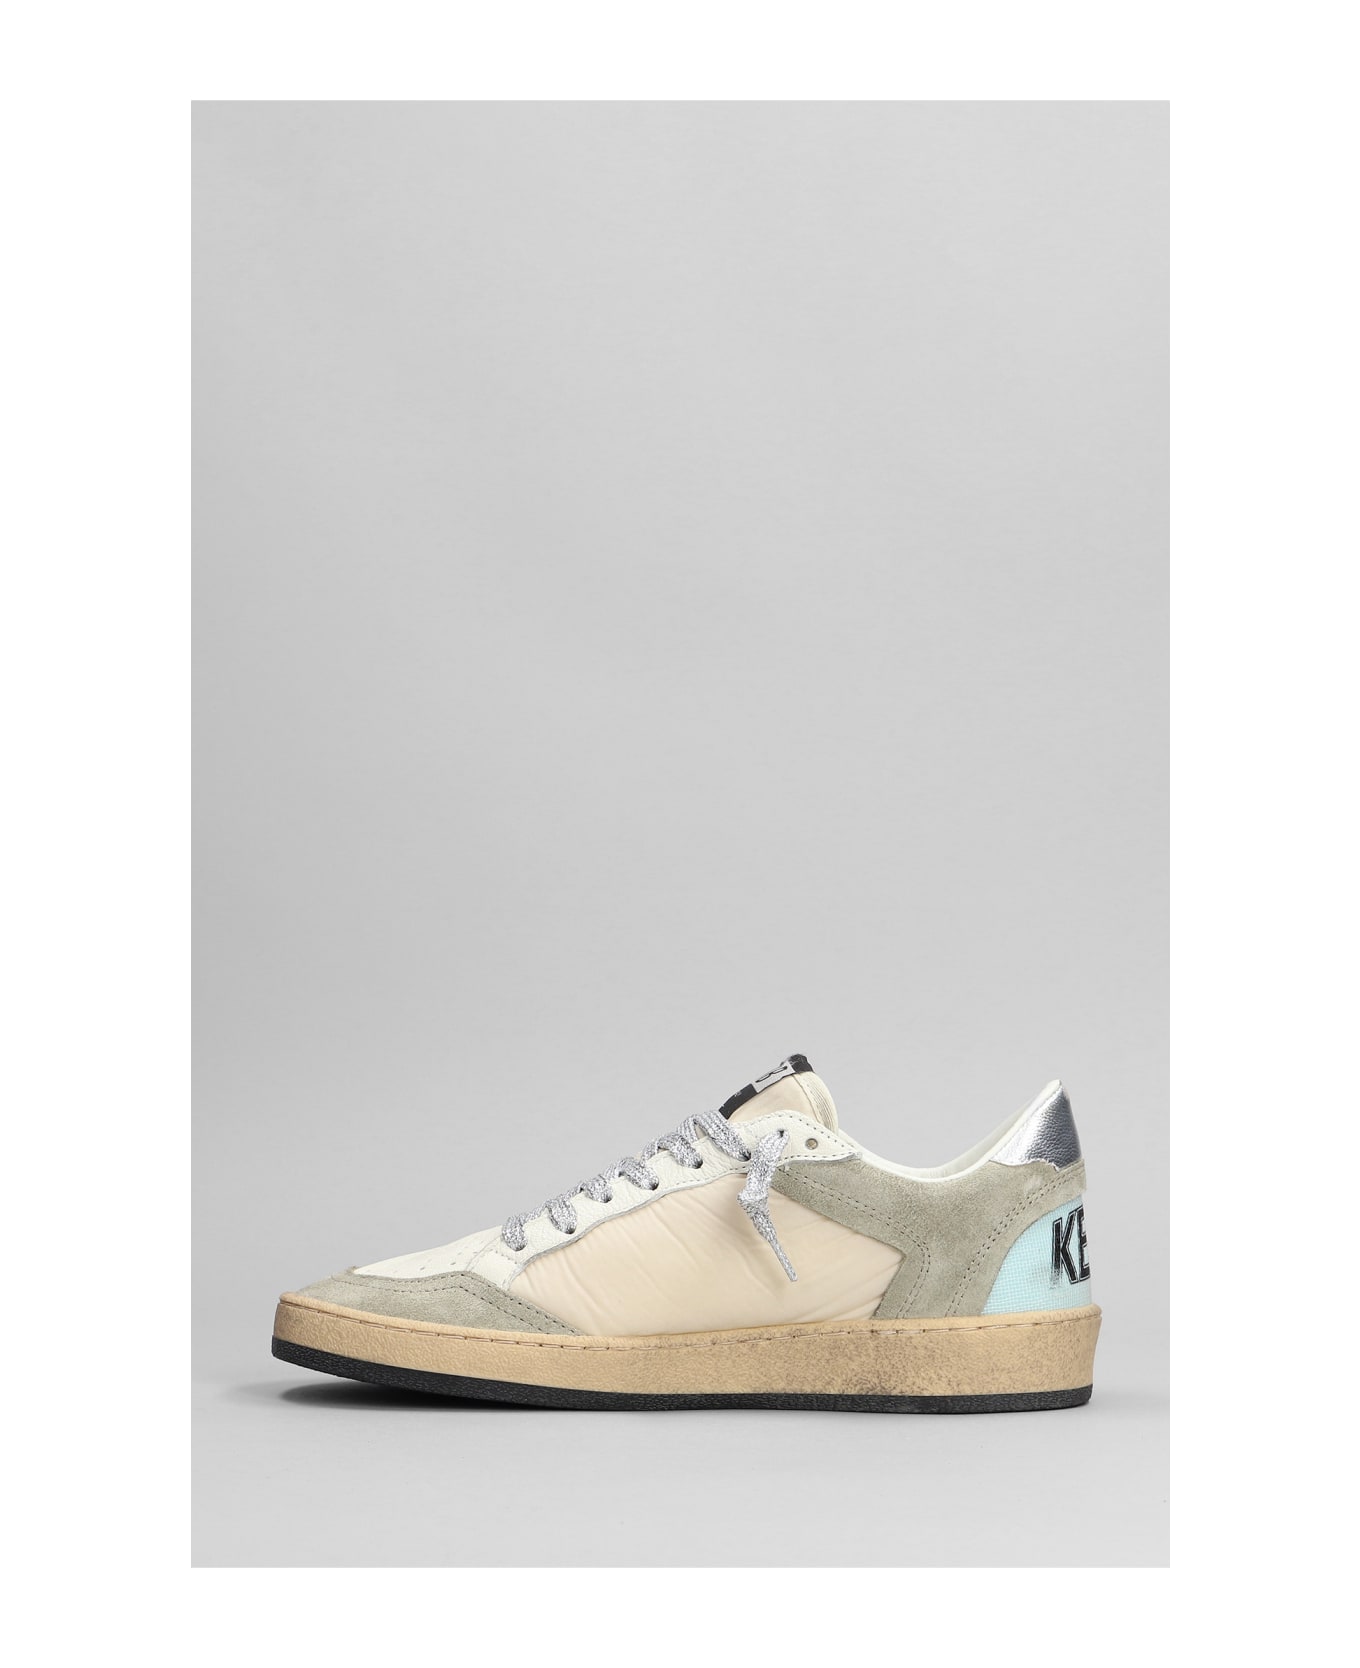 Golden Goose Ball Star Sneakers In Beige Leather And Fabric - beige